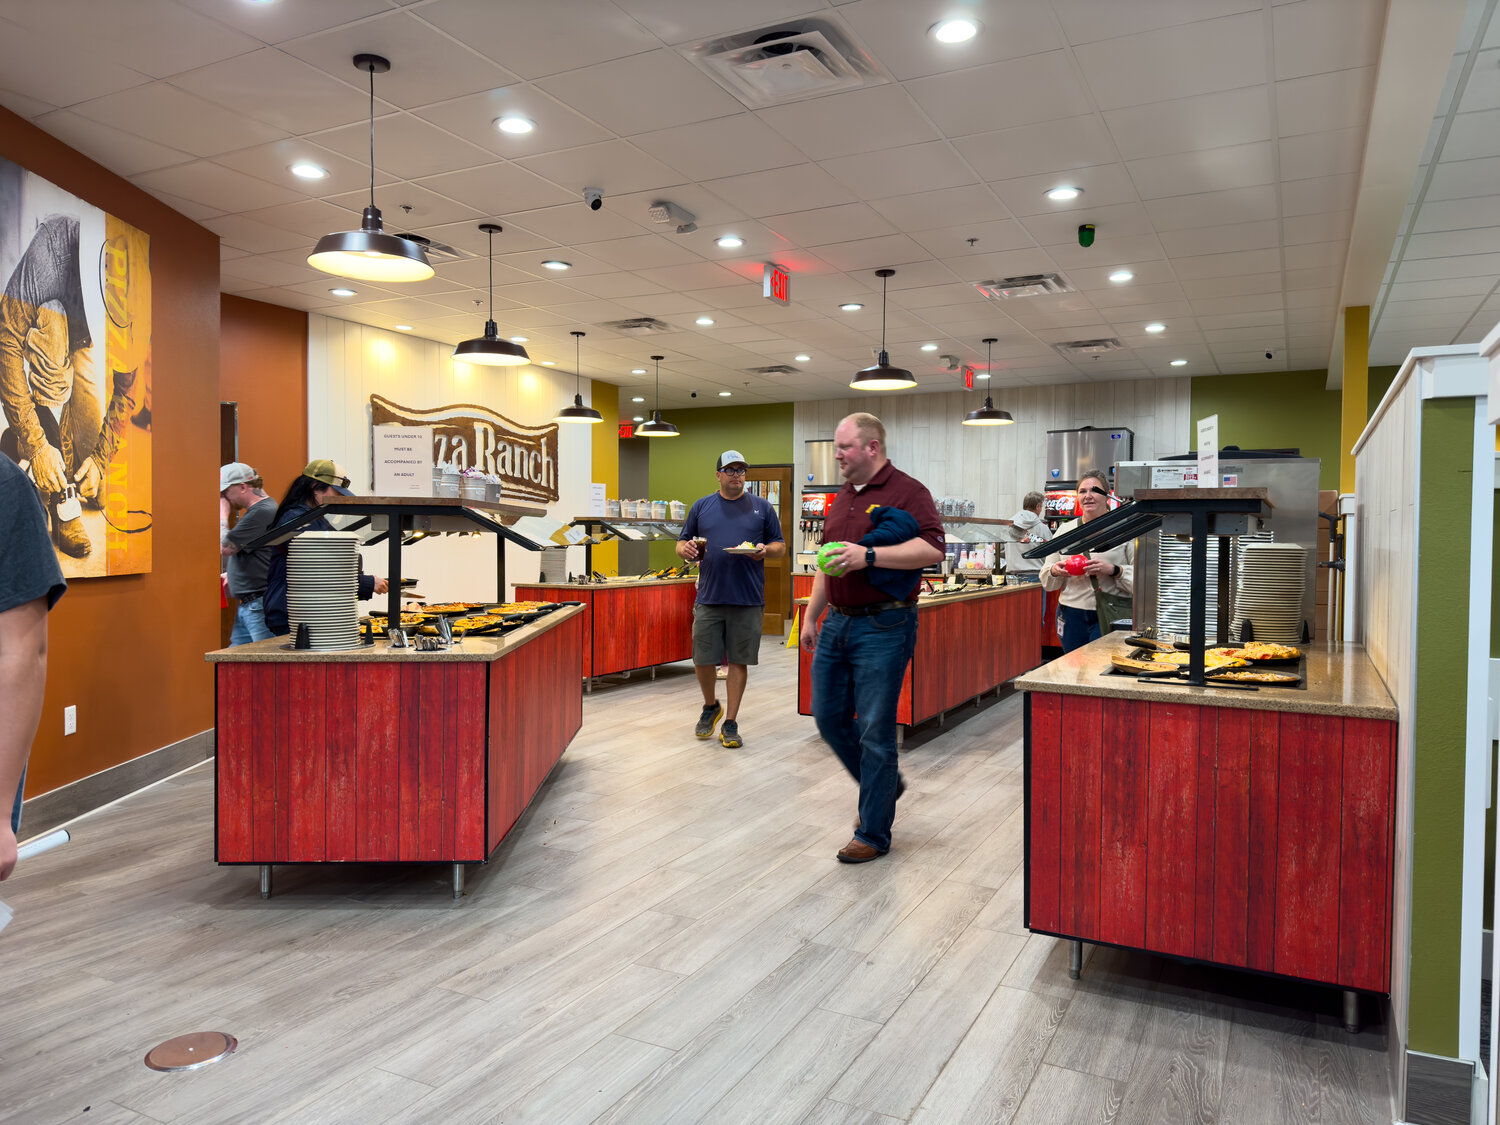 The heart of Pizza Ranch is the buffet. The new look is inviting and has a ton of space to move around while choosing pizza, chicken and sides and salad.